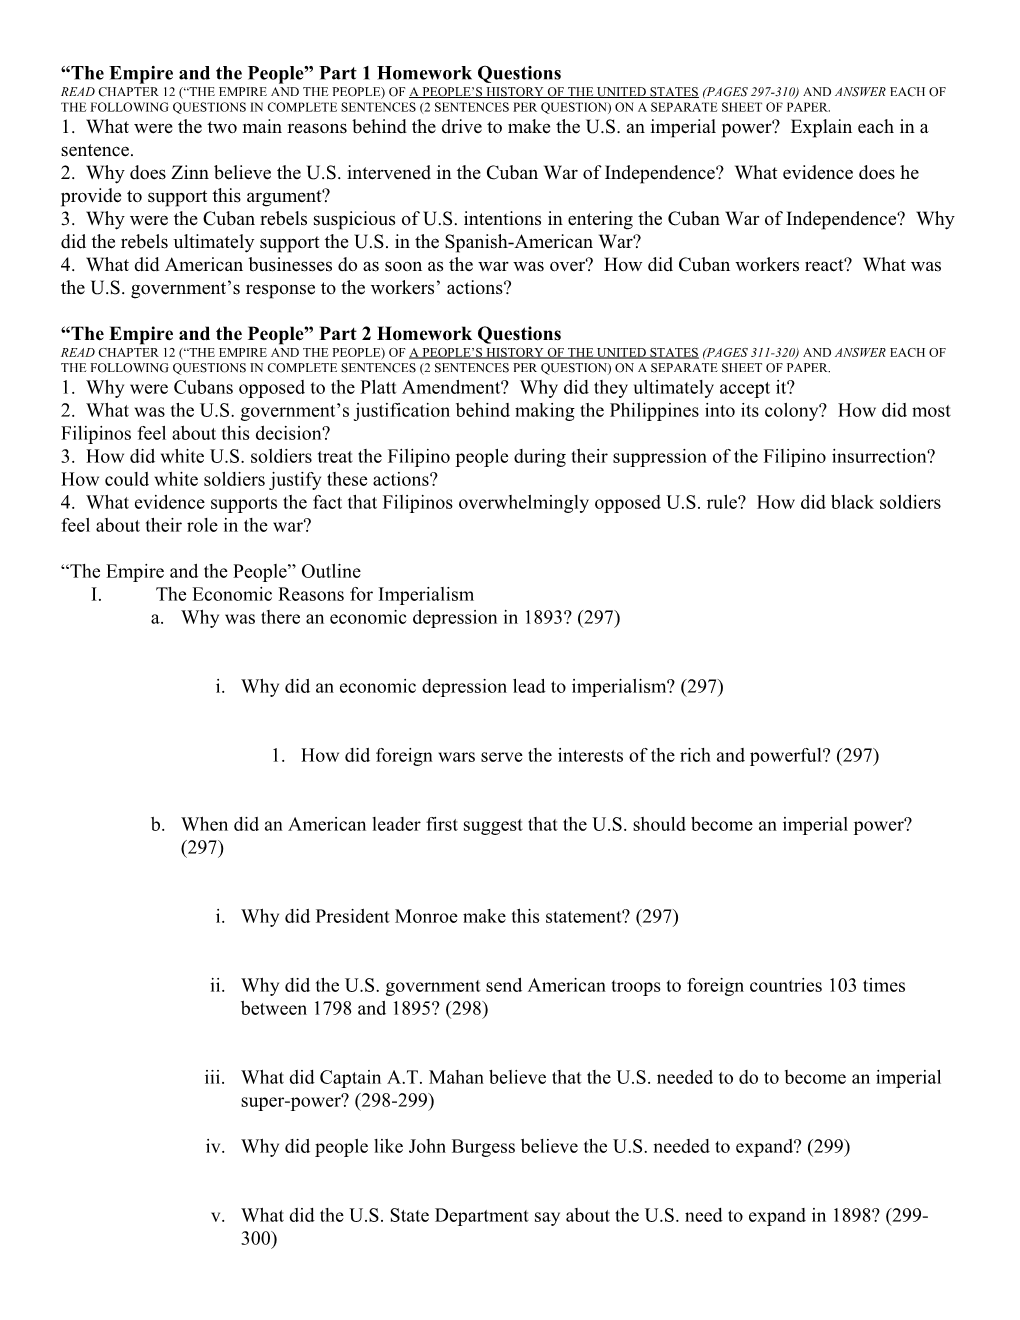 The Empire and the People Part 1 Homework Questions